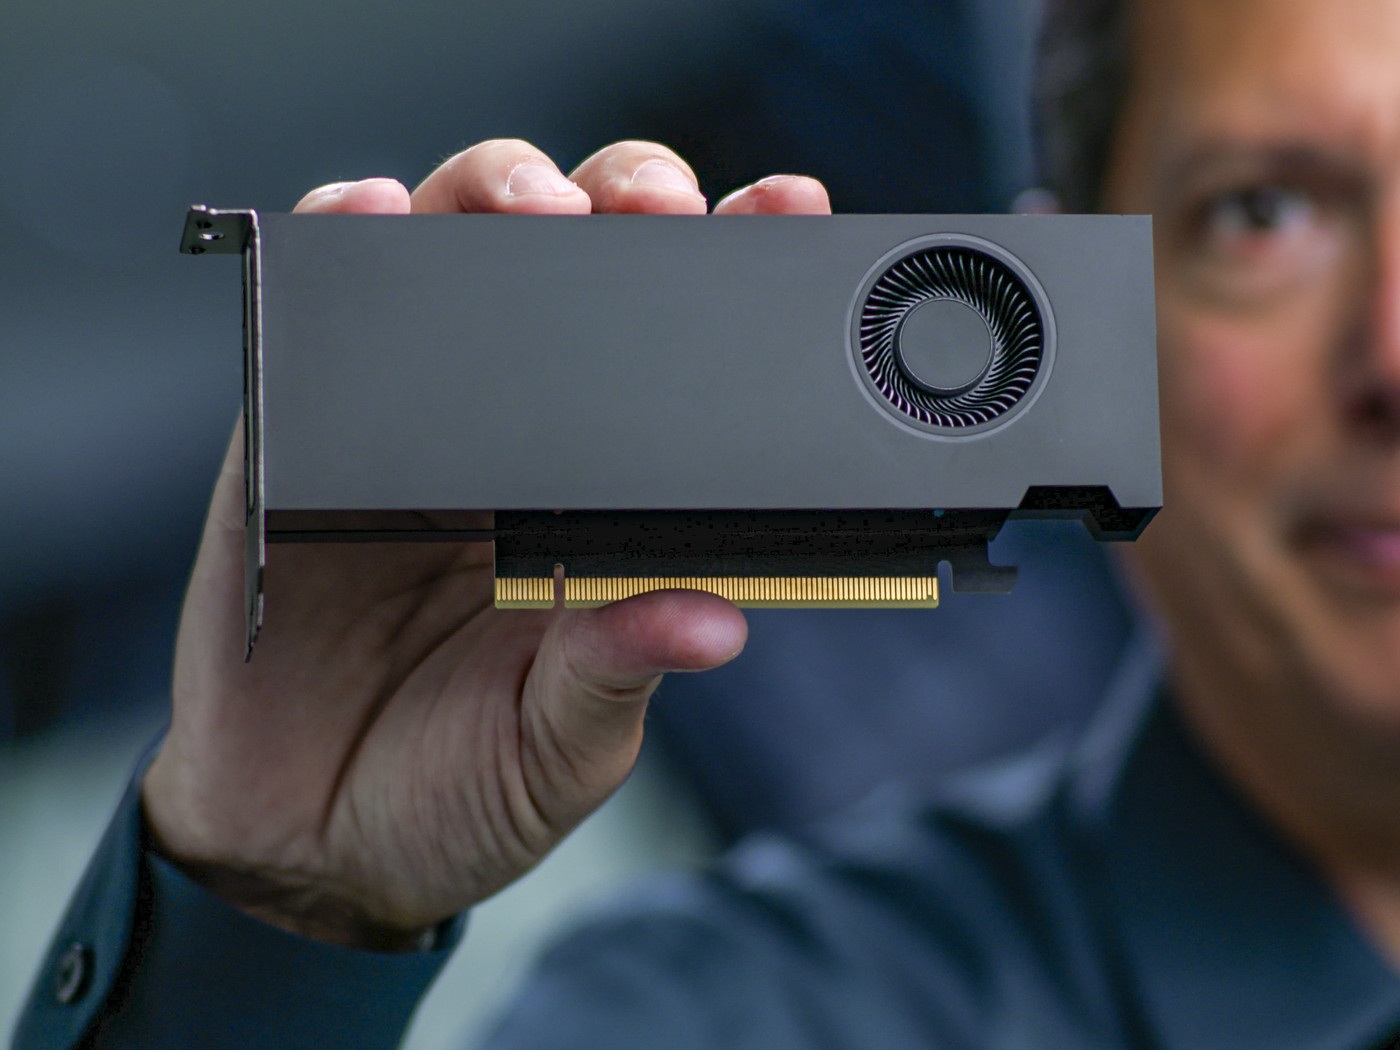 Nvidia's tiny RTX A2000 GPU can fit inside a small form factor PC 